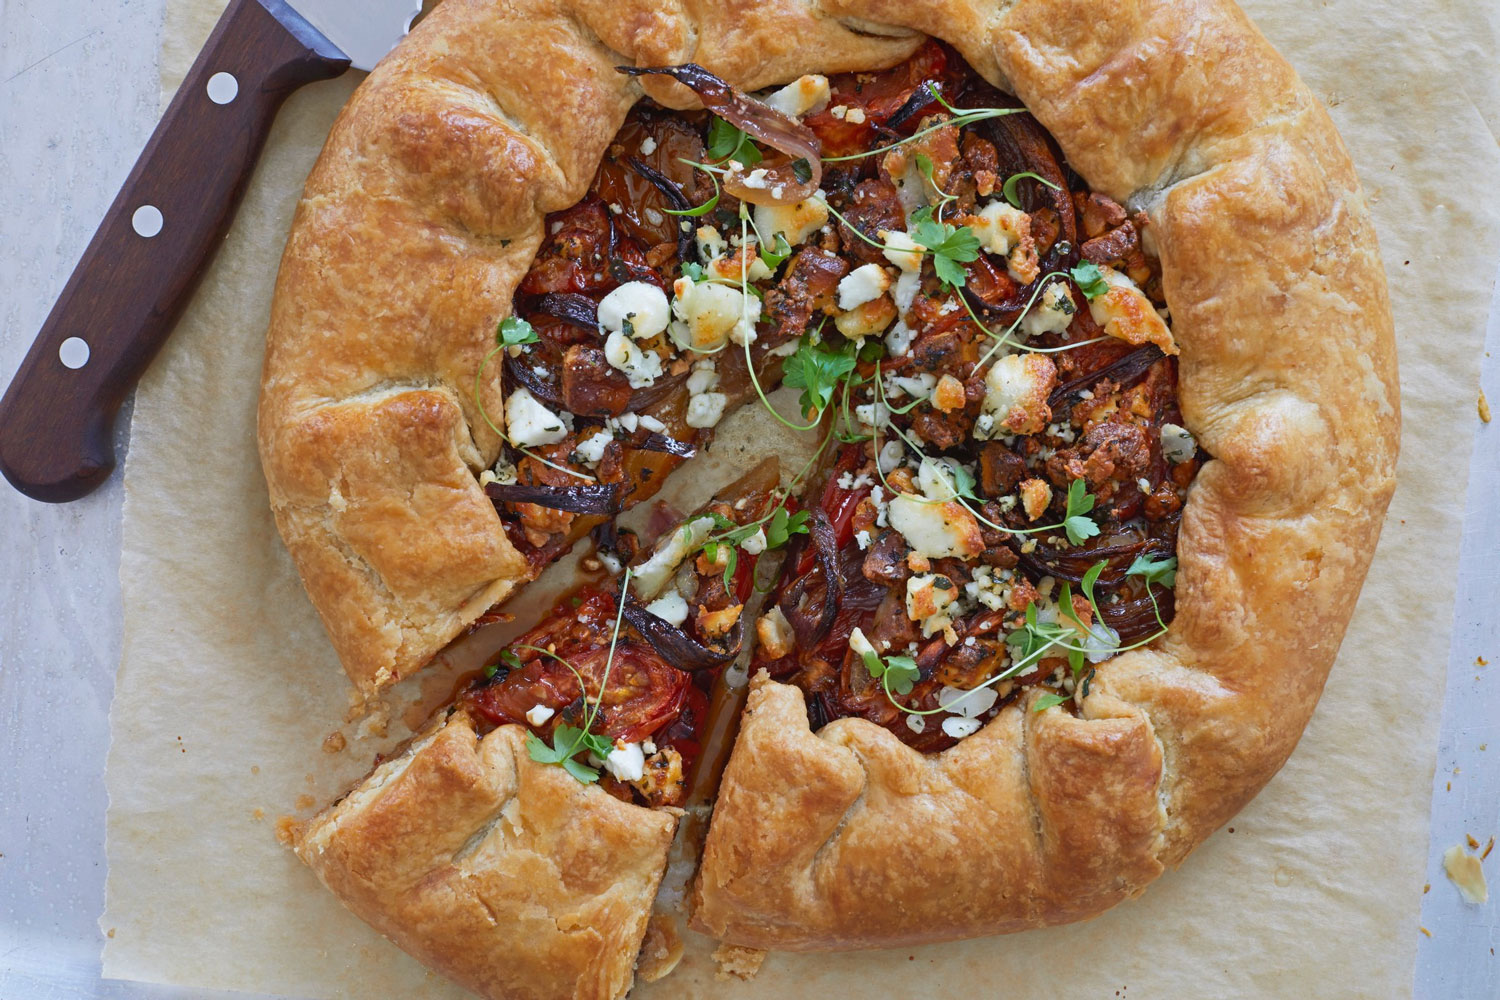 A pastry galette, filled with vegetables and cheese